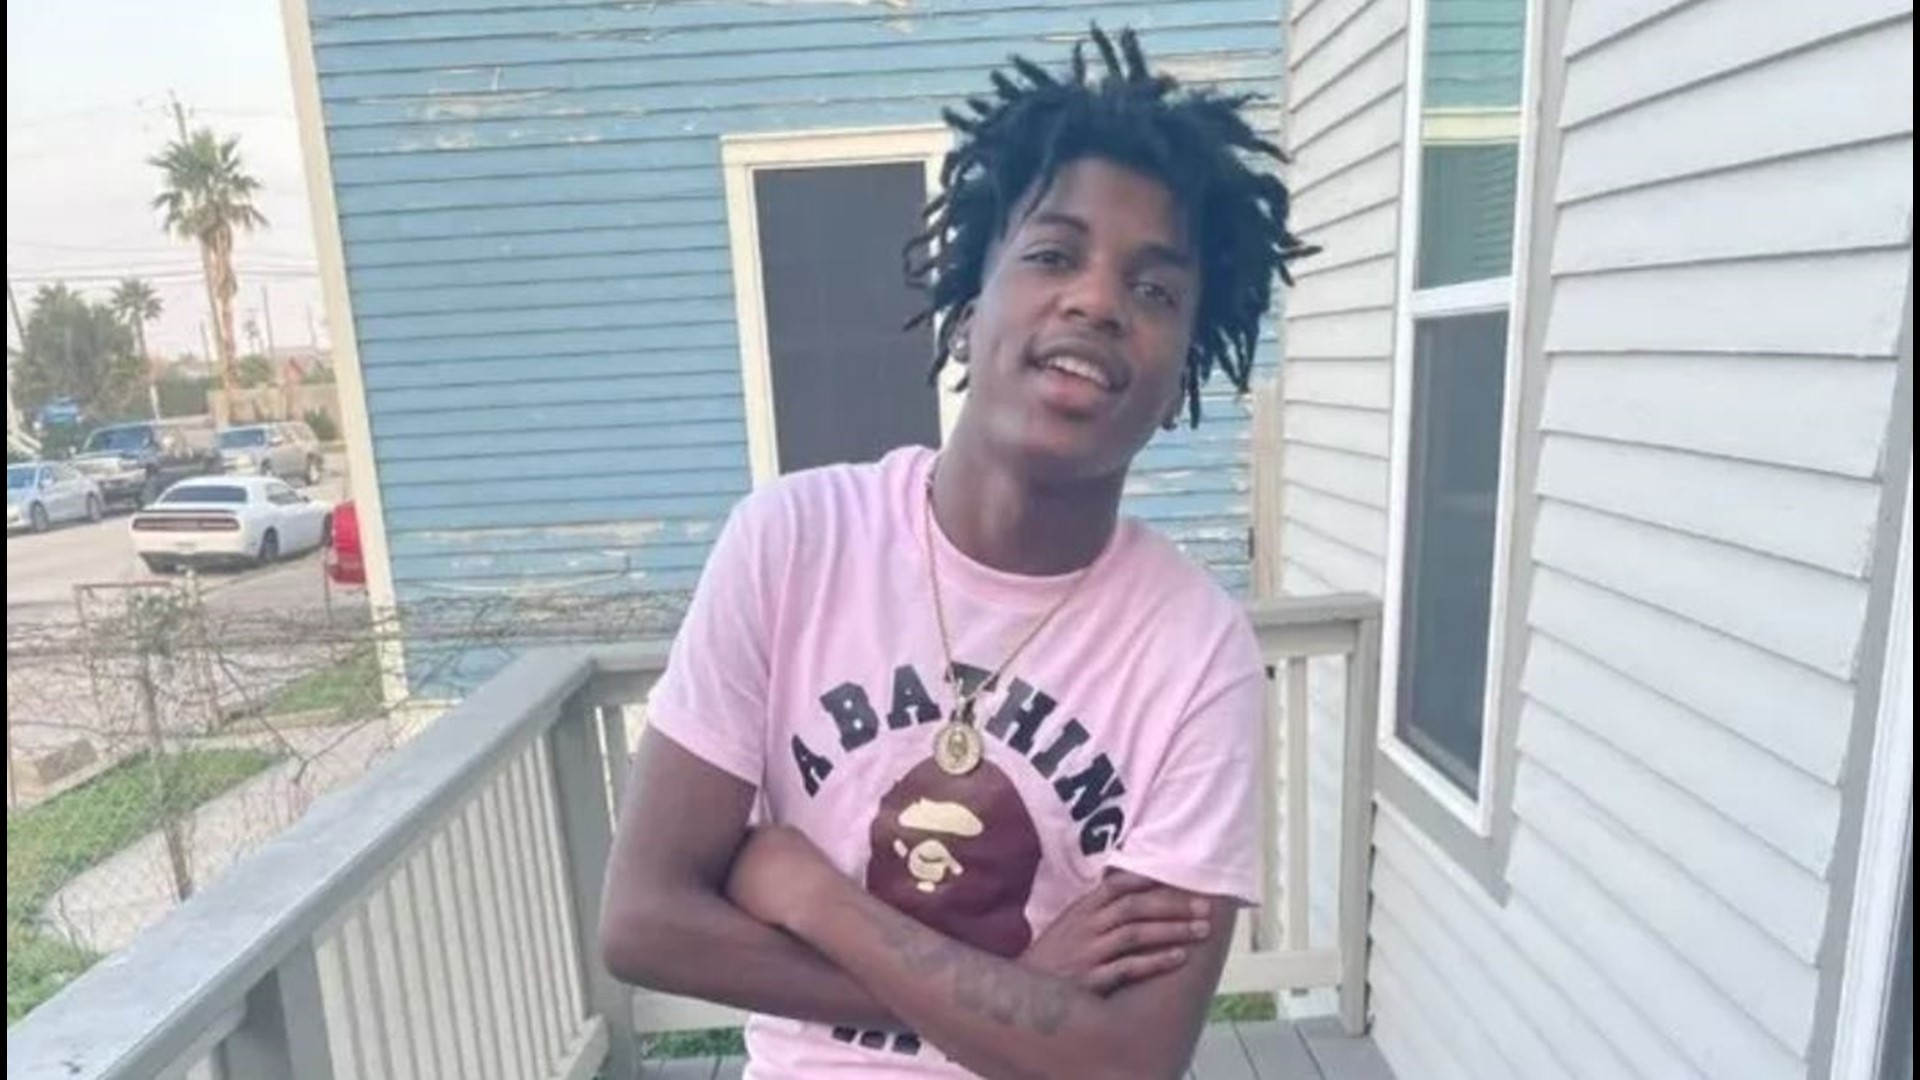 Payton Lawrence, 19, was shot and killed by a 17-year department veteran around 3 a.m. on Dec. 14, officials say. The officer has not been identified.